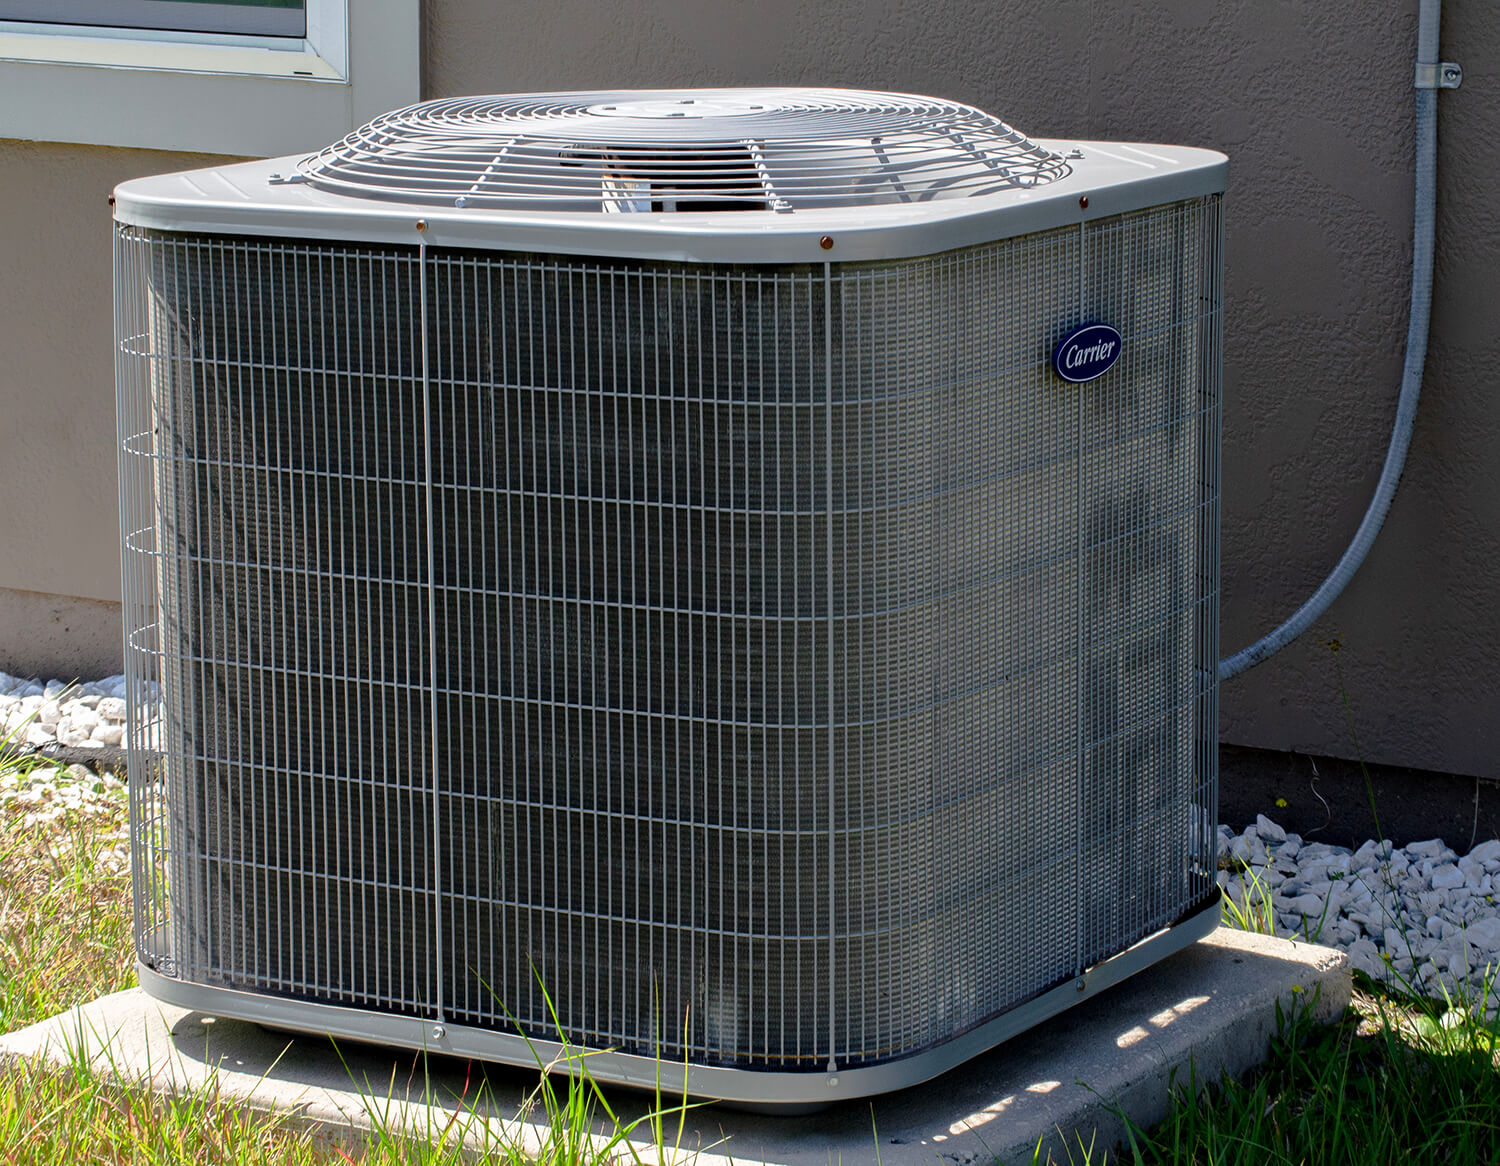 Dusting off the air conditioner playbook